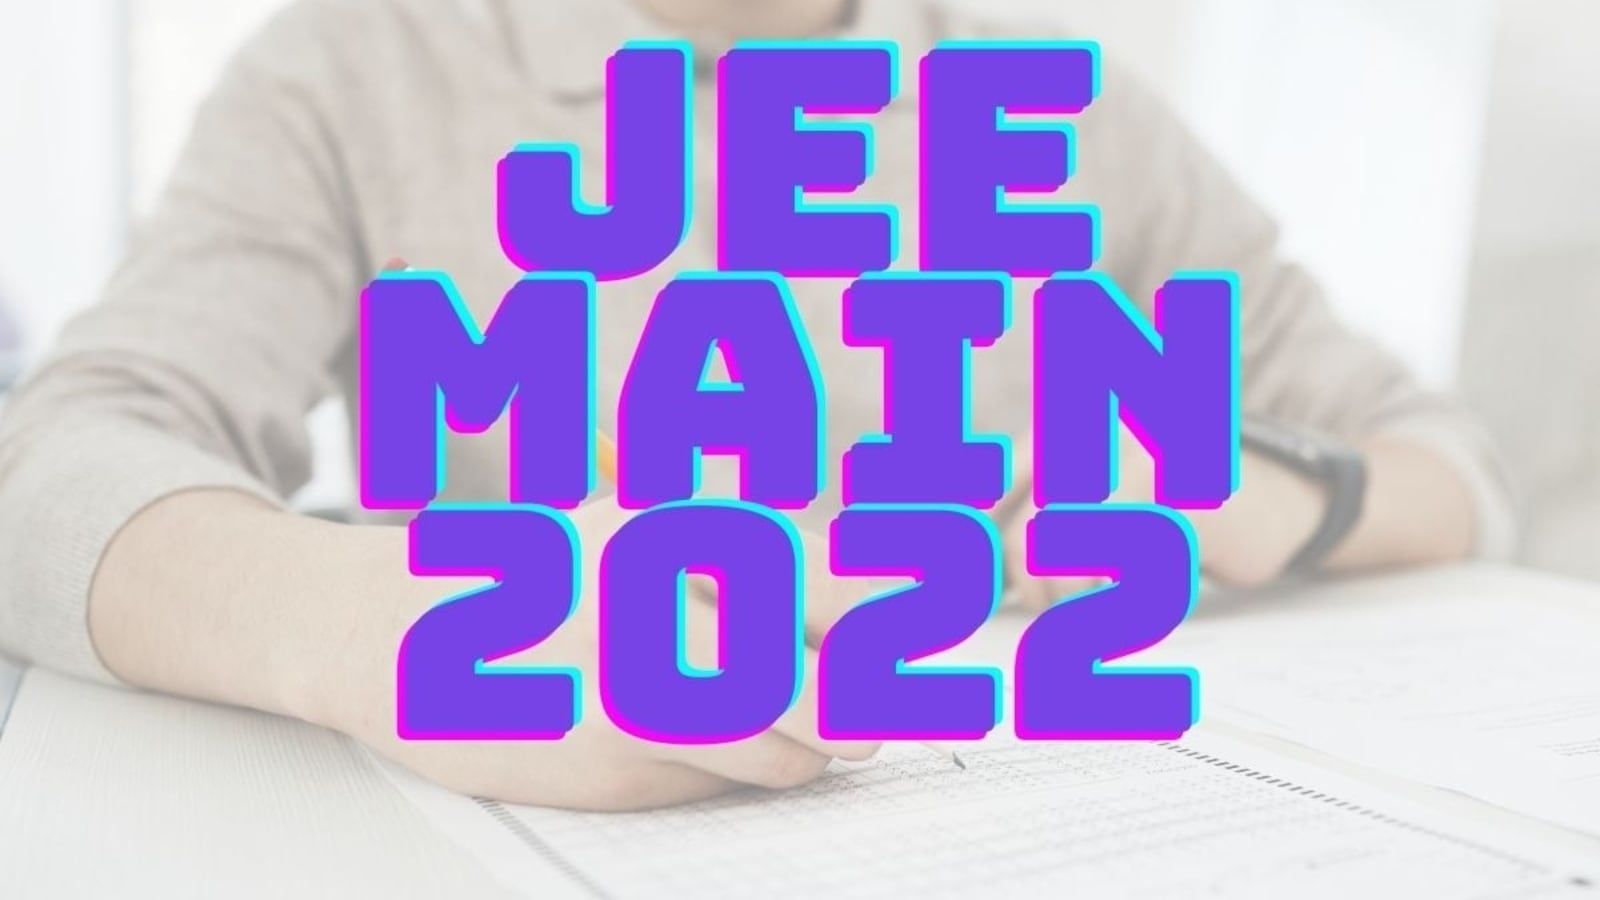 JEE Main Paper 2 June 23 first session: Analysis based on students' reaction